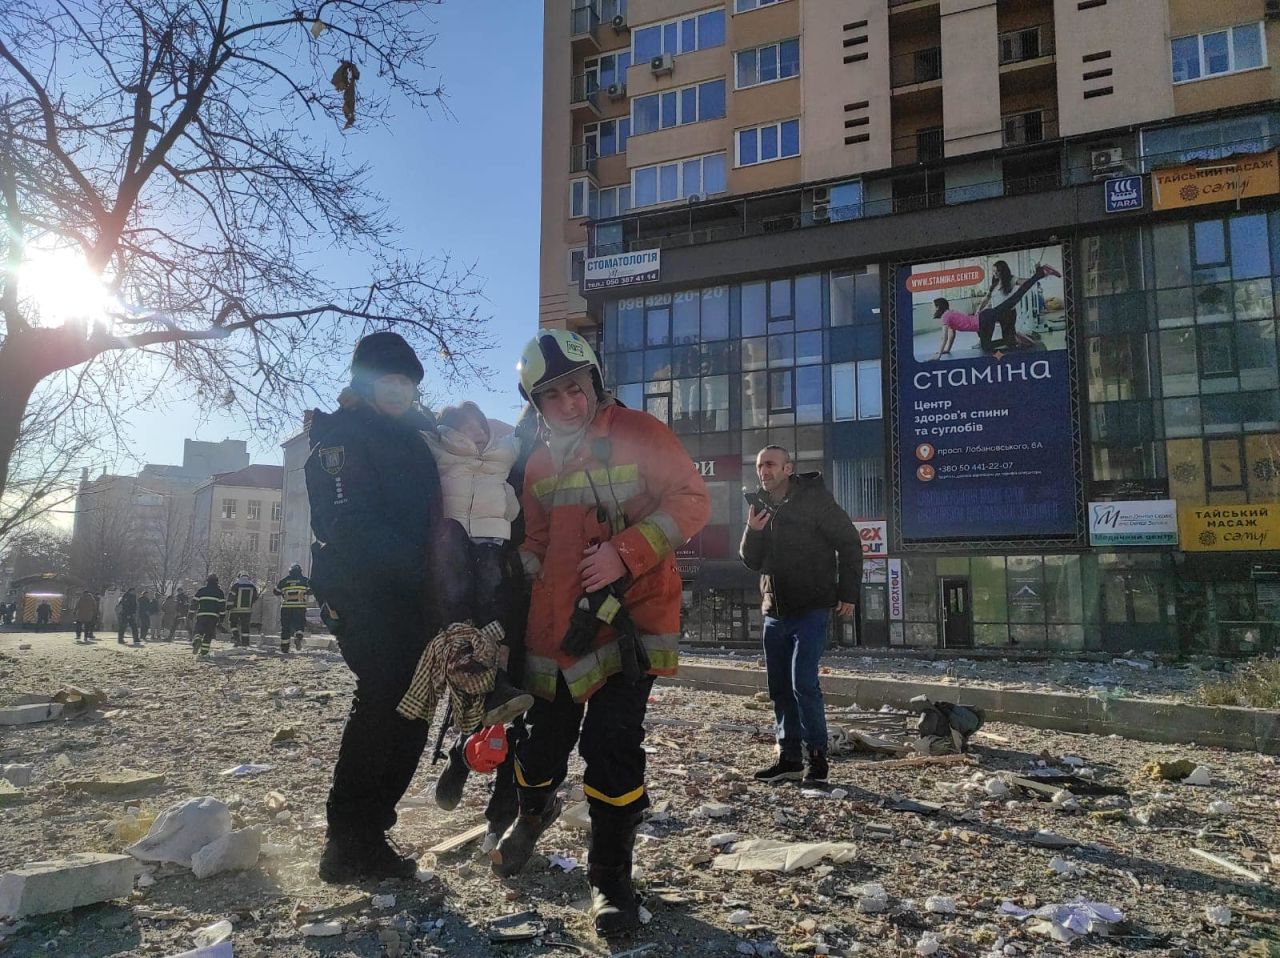 Residents being evacuated from damaged apartment building in Kyiv on February 26.